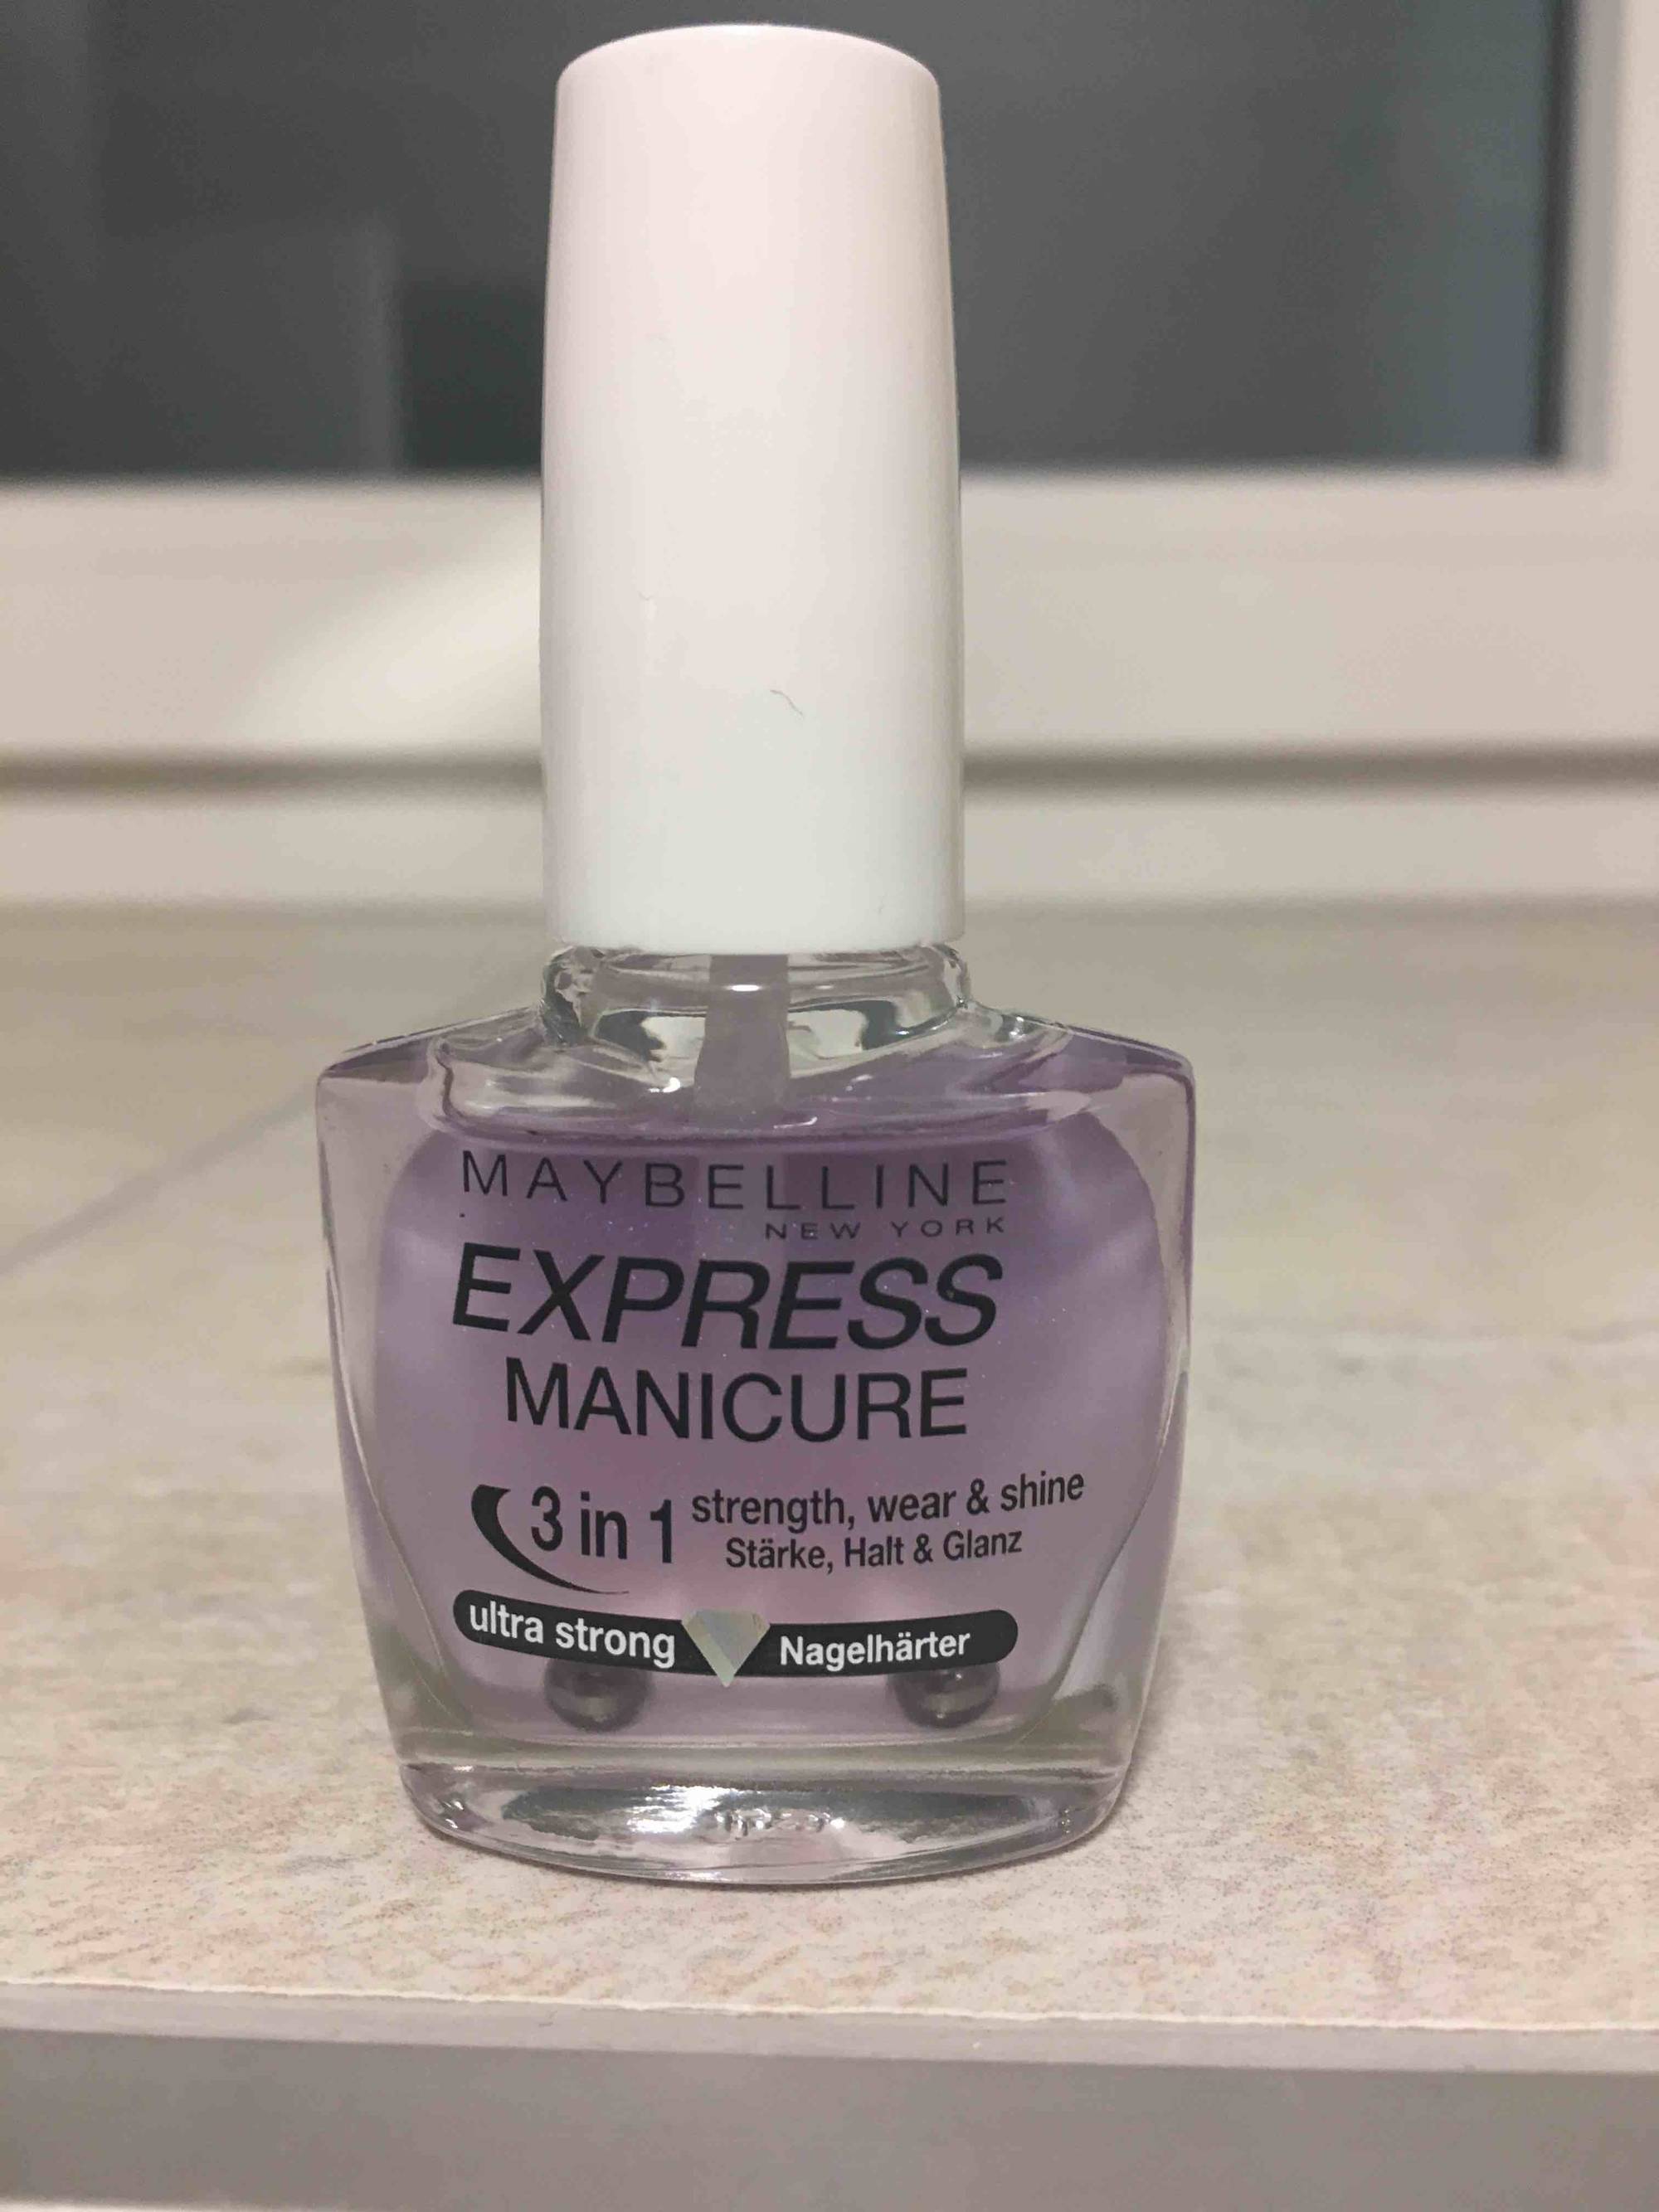 Composition MAYBELLINE NEW Choisir manicure 3 - in YORK Ultra UFC-Que 1 strong - Express